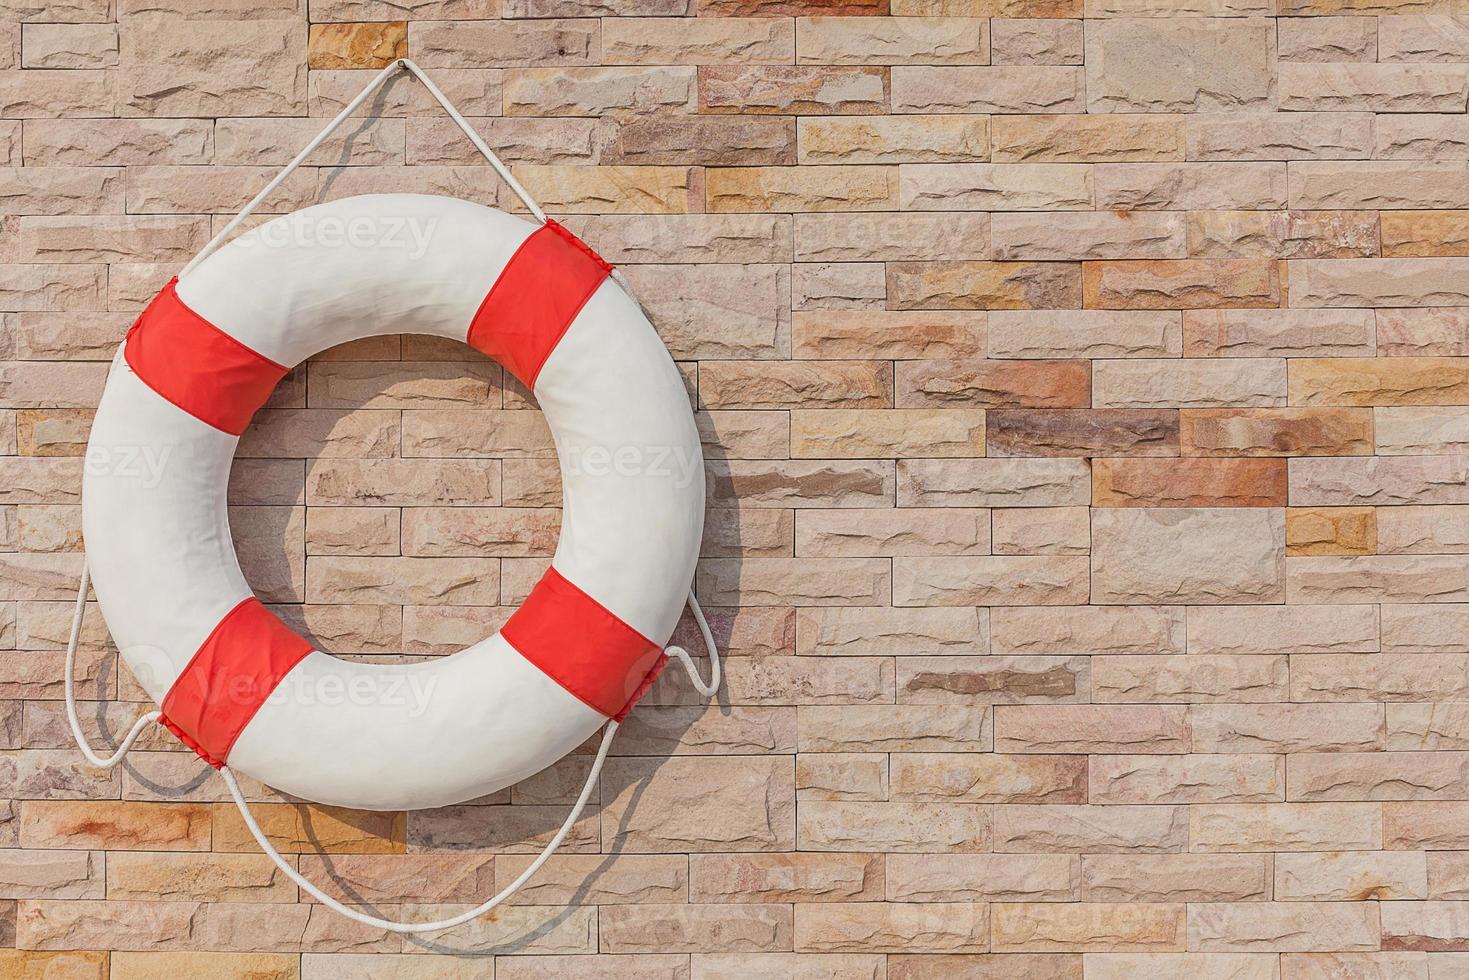 The life buoy is hanged on brick wall background. photo